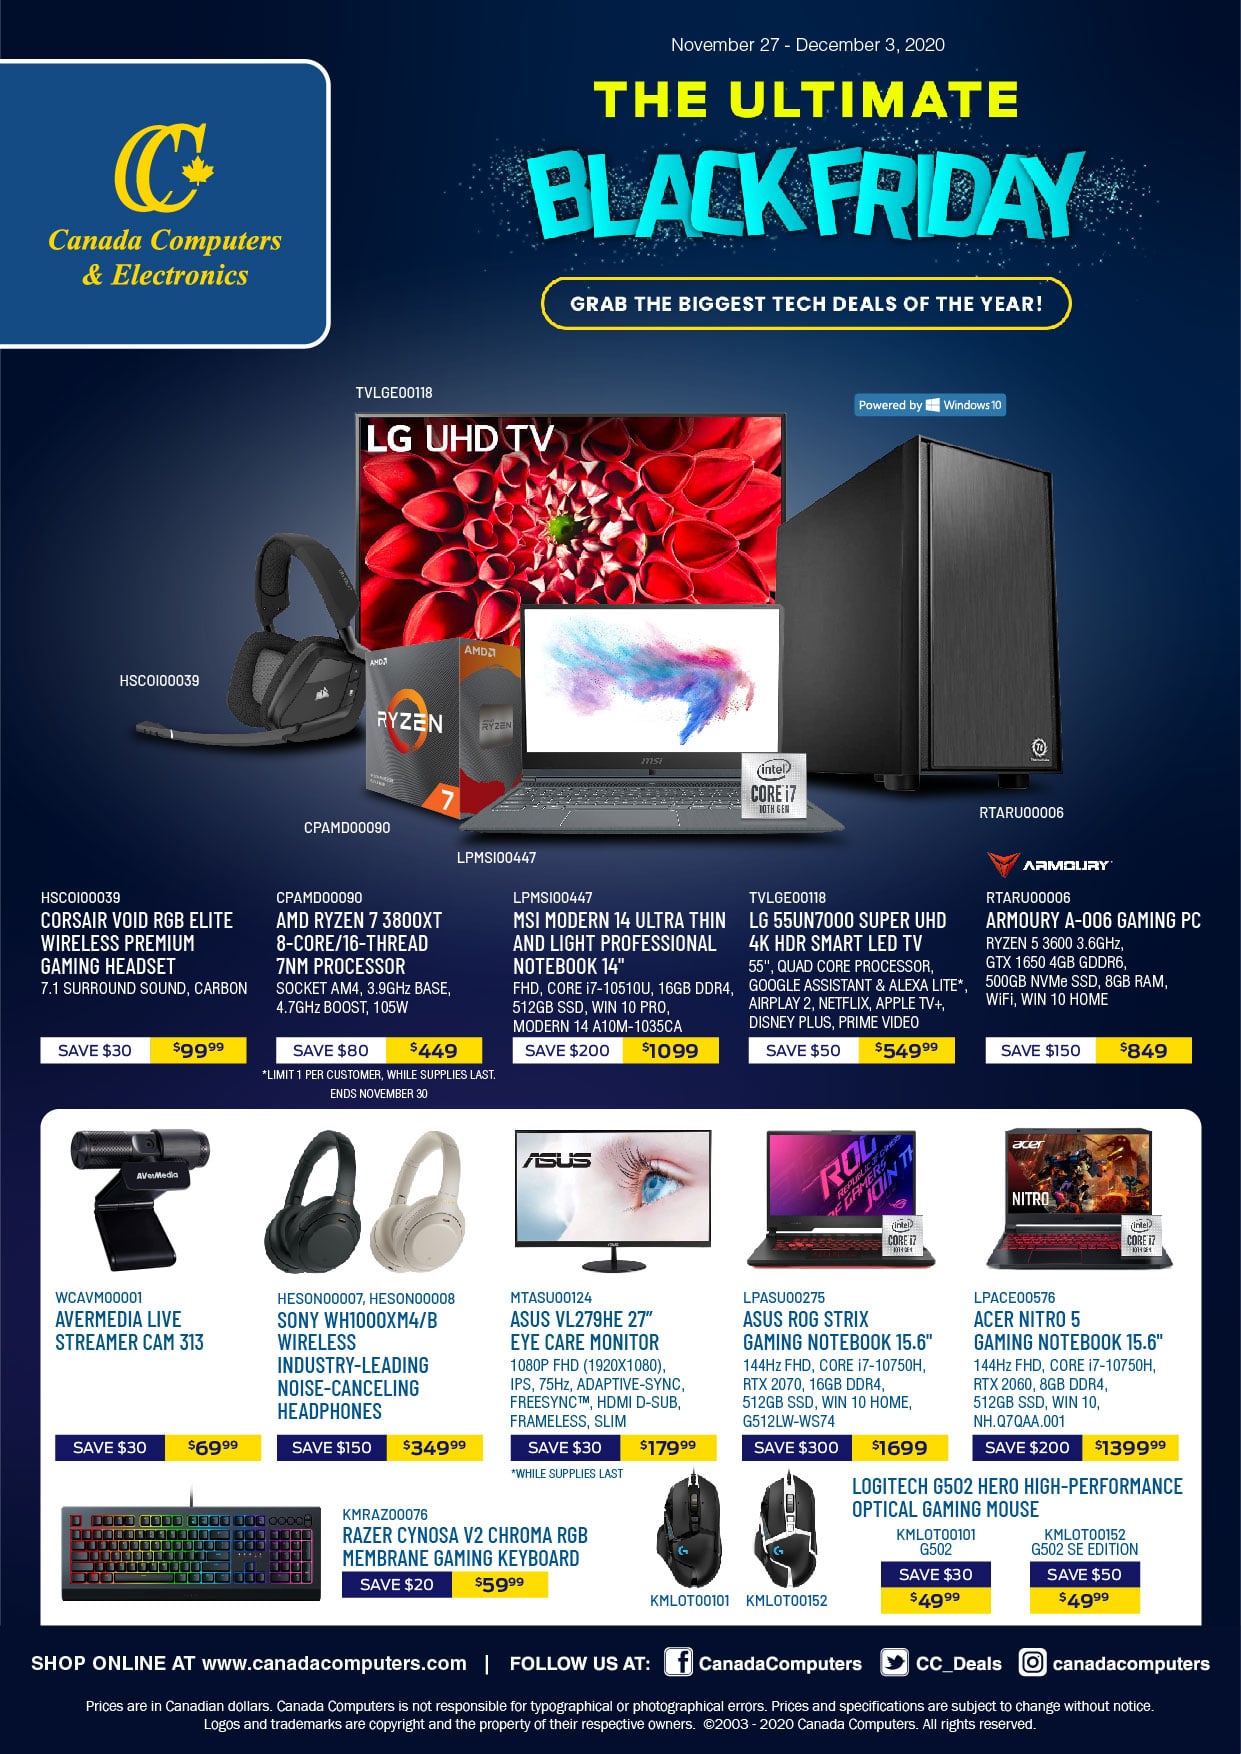 Canada Computers Black Friday 2021 Sale Flyer - When Are Black Friday Deals Announced 2021